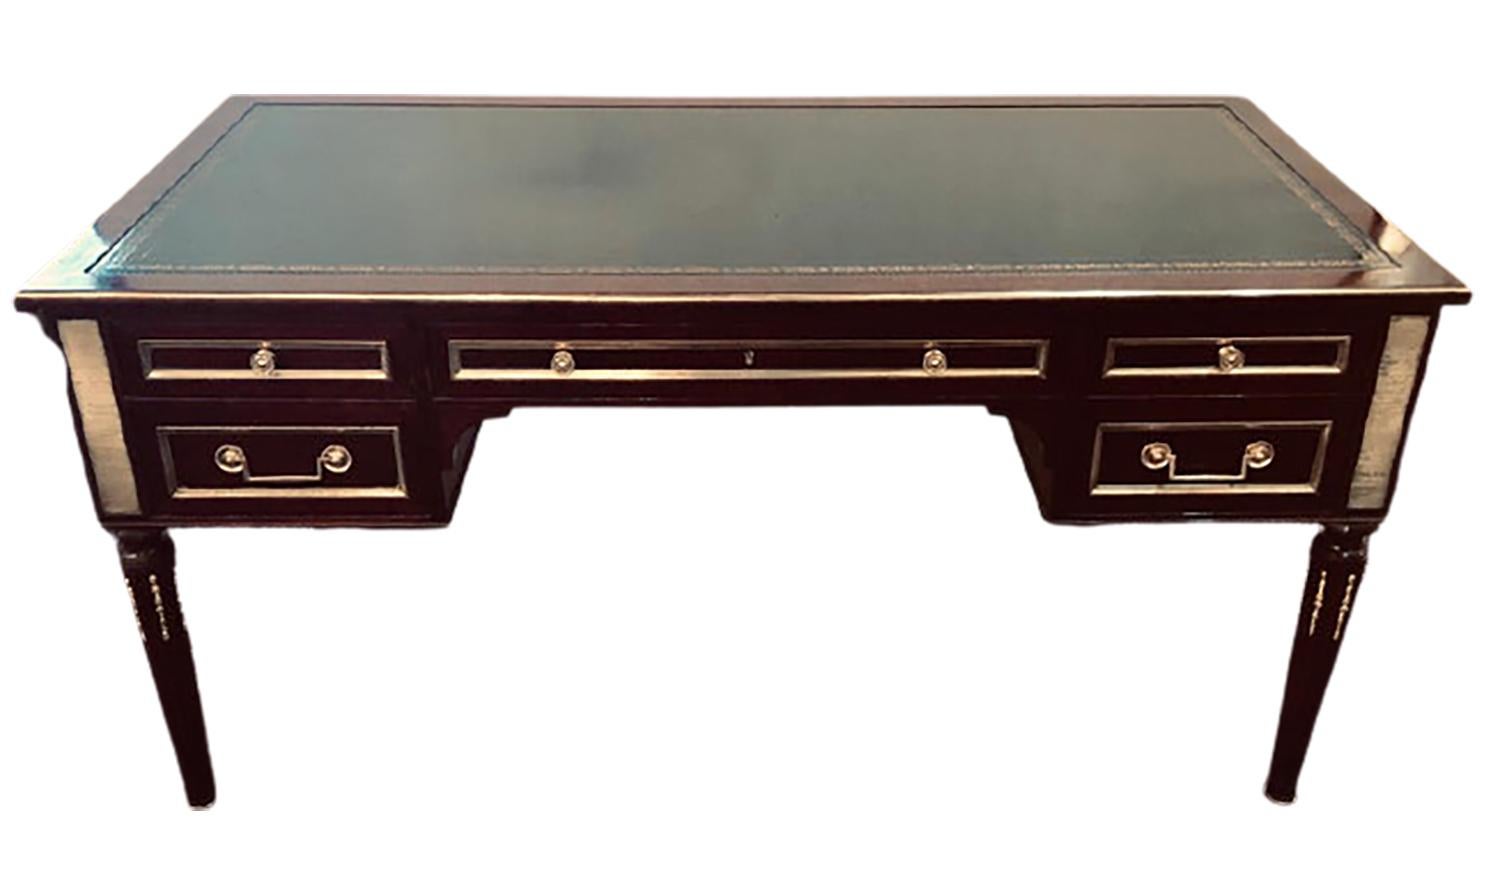 Jansen style fully refinished Louis XVI fashioned bronze-mounted desk. This fine custom quality desk has a wonderfully fully polished flame mahogany finish on tapering leg with bronze sabots and flame reeded legs supporting a large center bronze